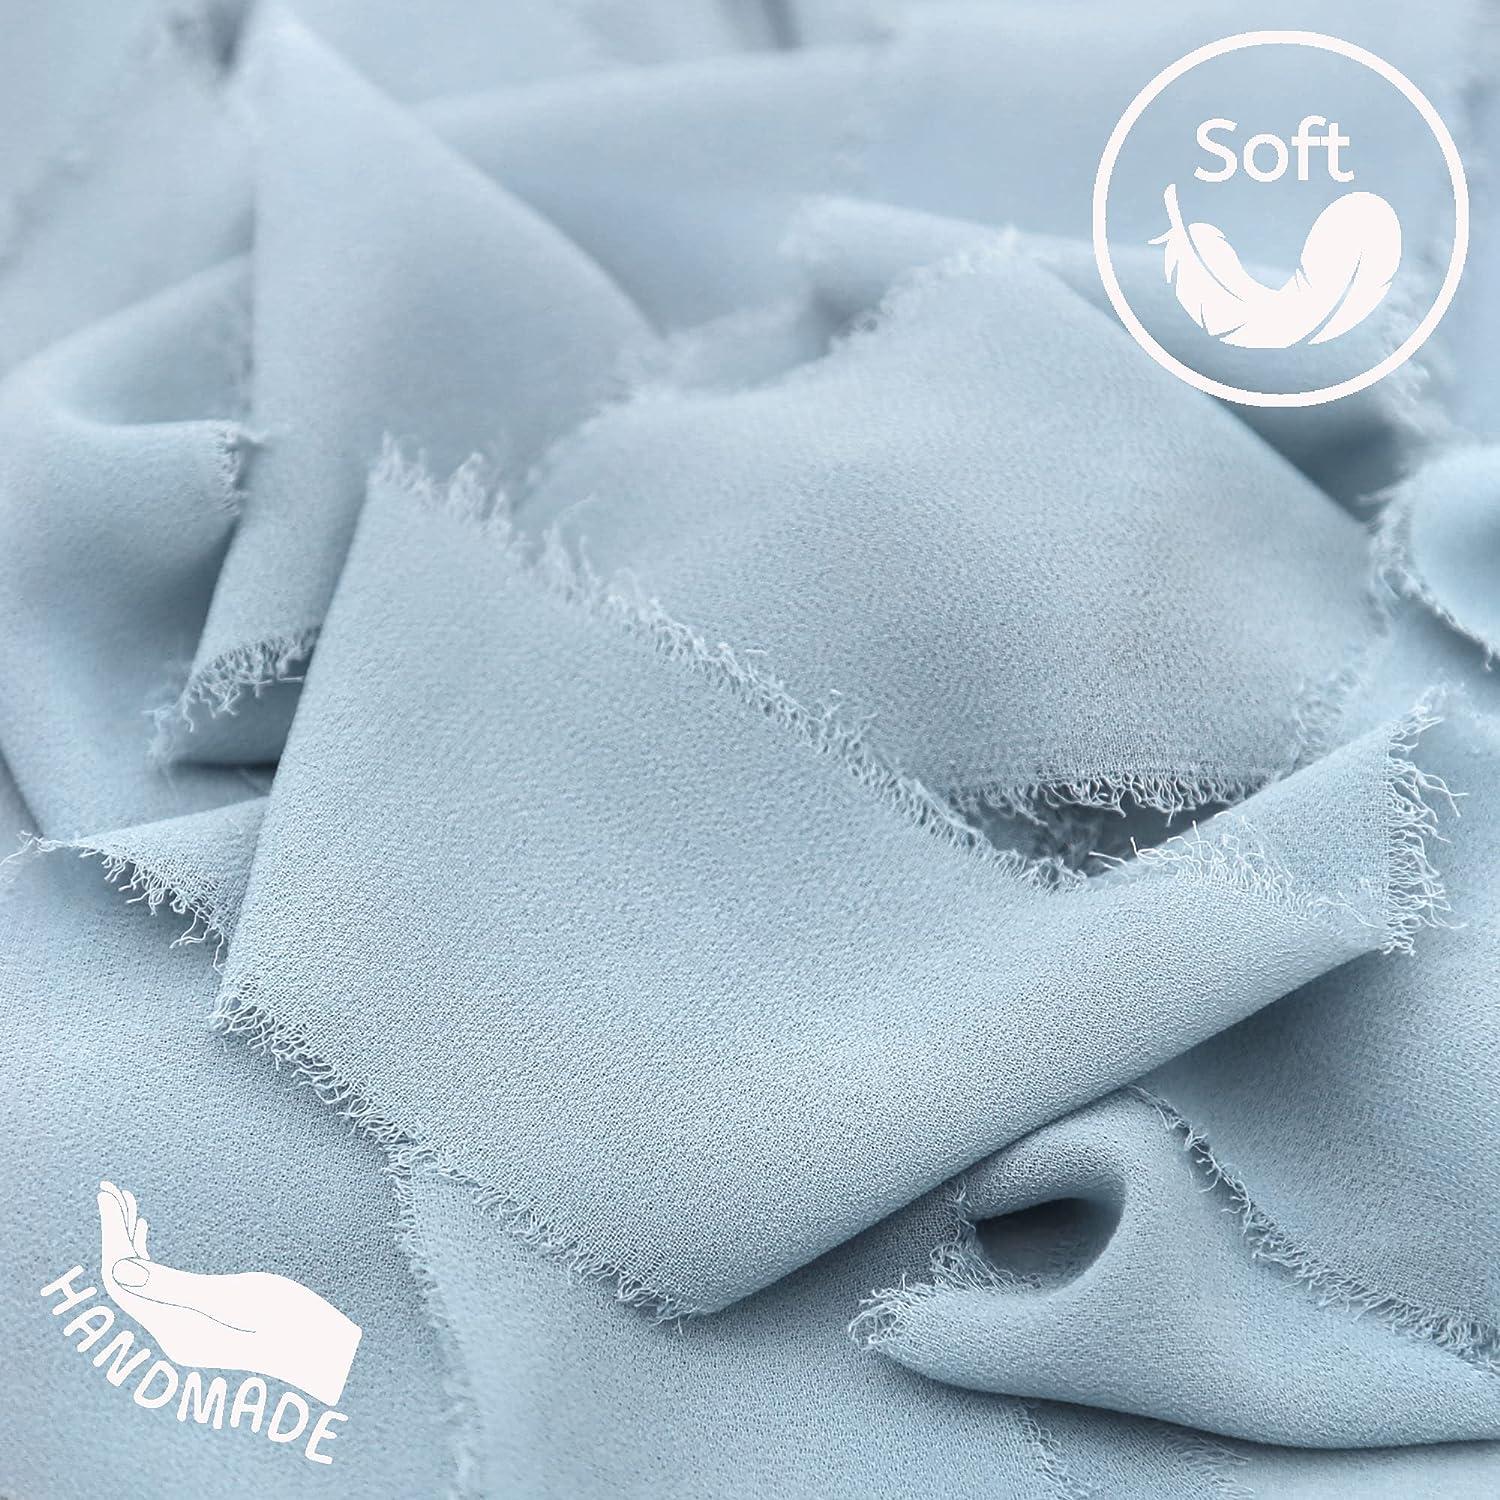 Naler 6 Rolls 36 Yards Handmade Fringe Chiffon Ribbons for Gift Wrapping  Wedding Bouquets Bridal Shower Decorations,Dusty Blue 